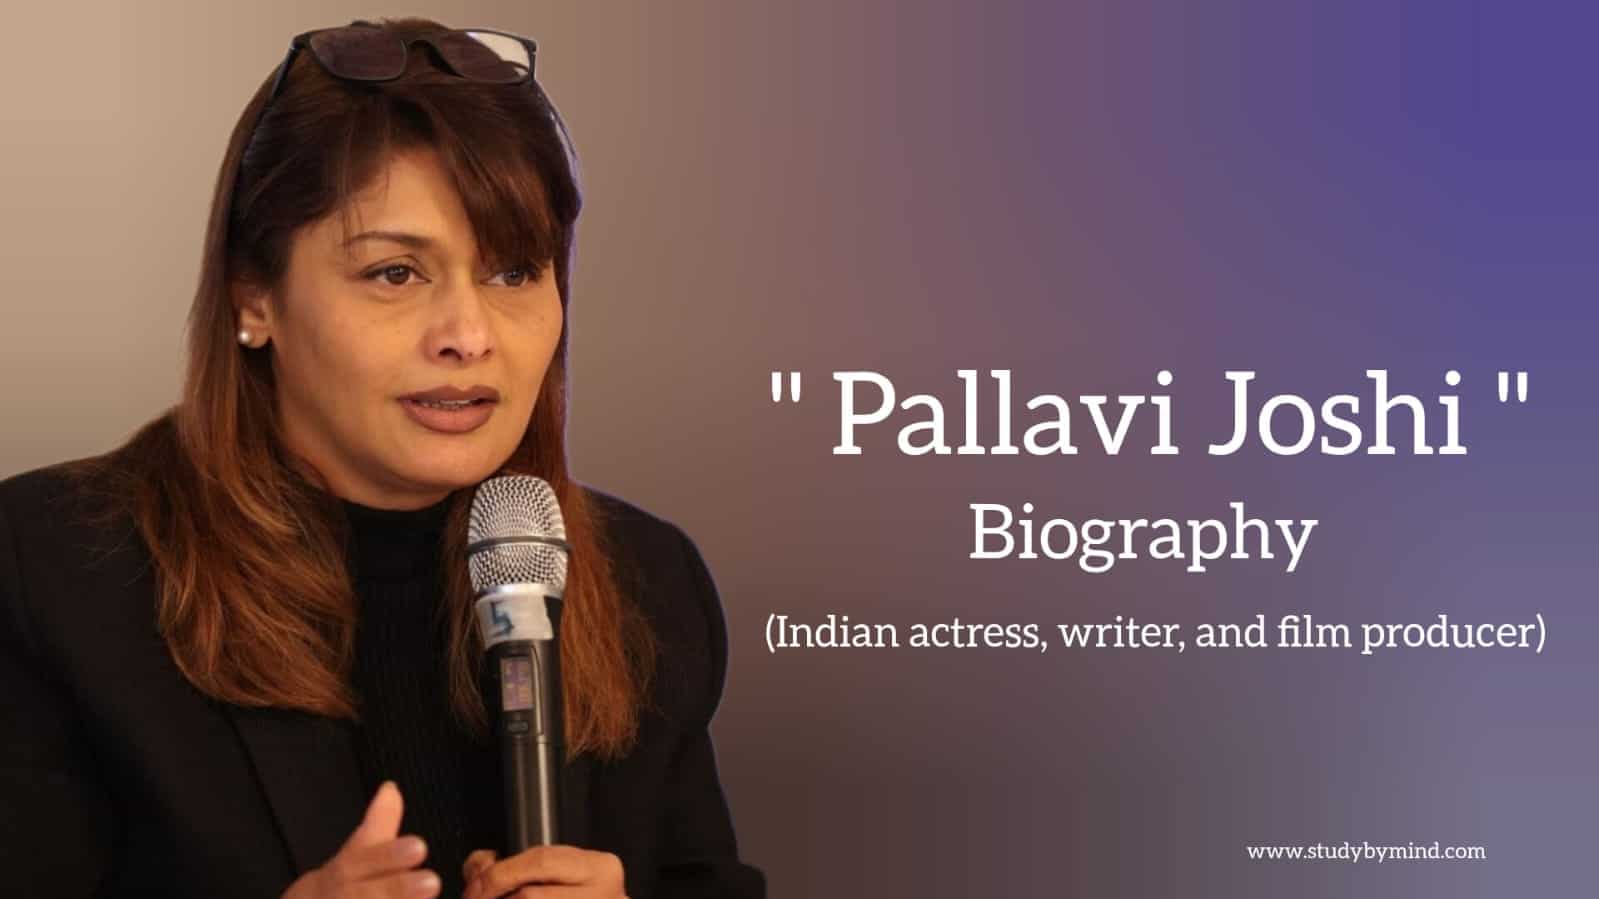 You are currently viewing Pallavi joshi biography in english (Indian Actress and Film Producer)